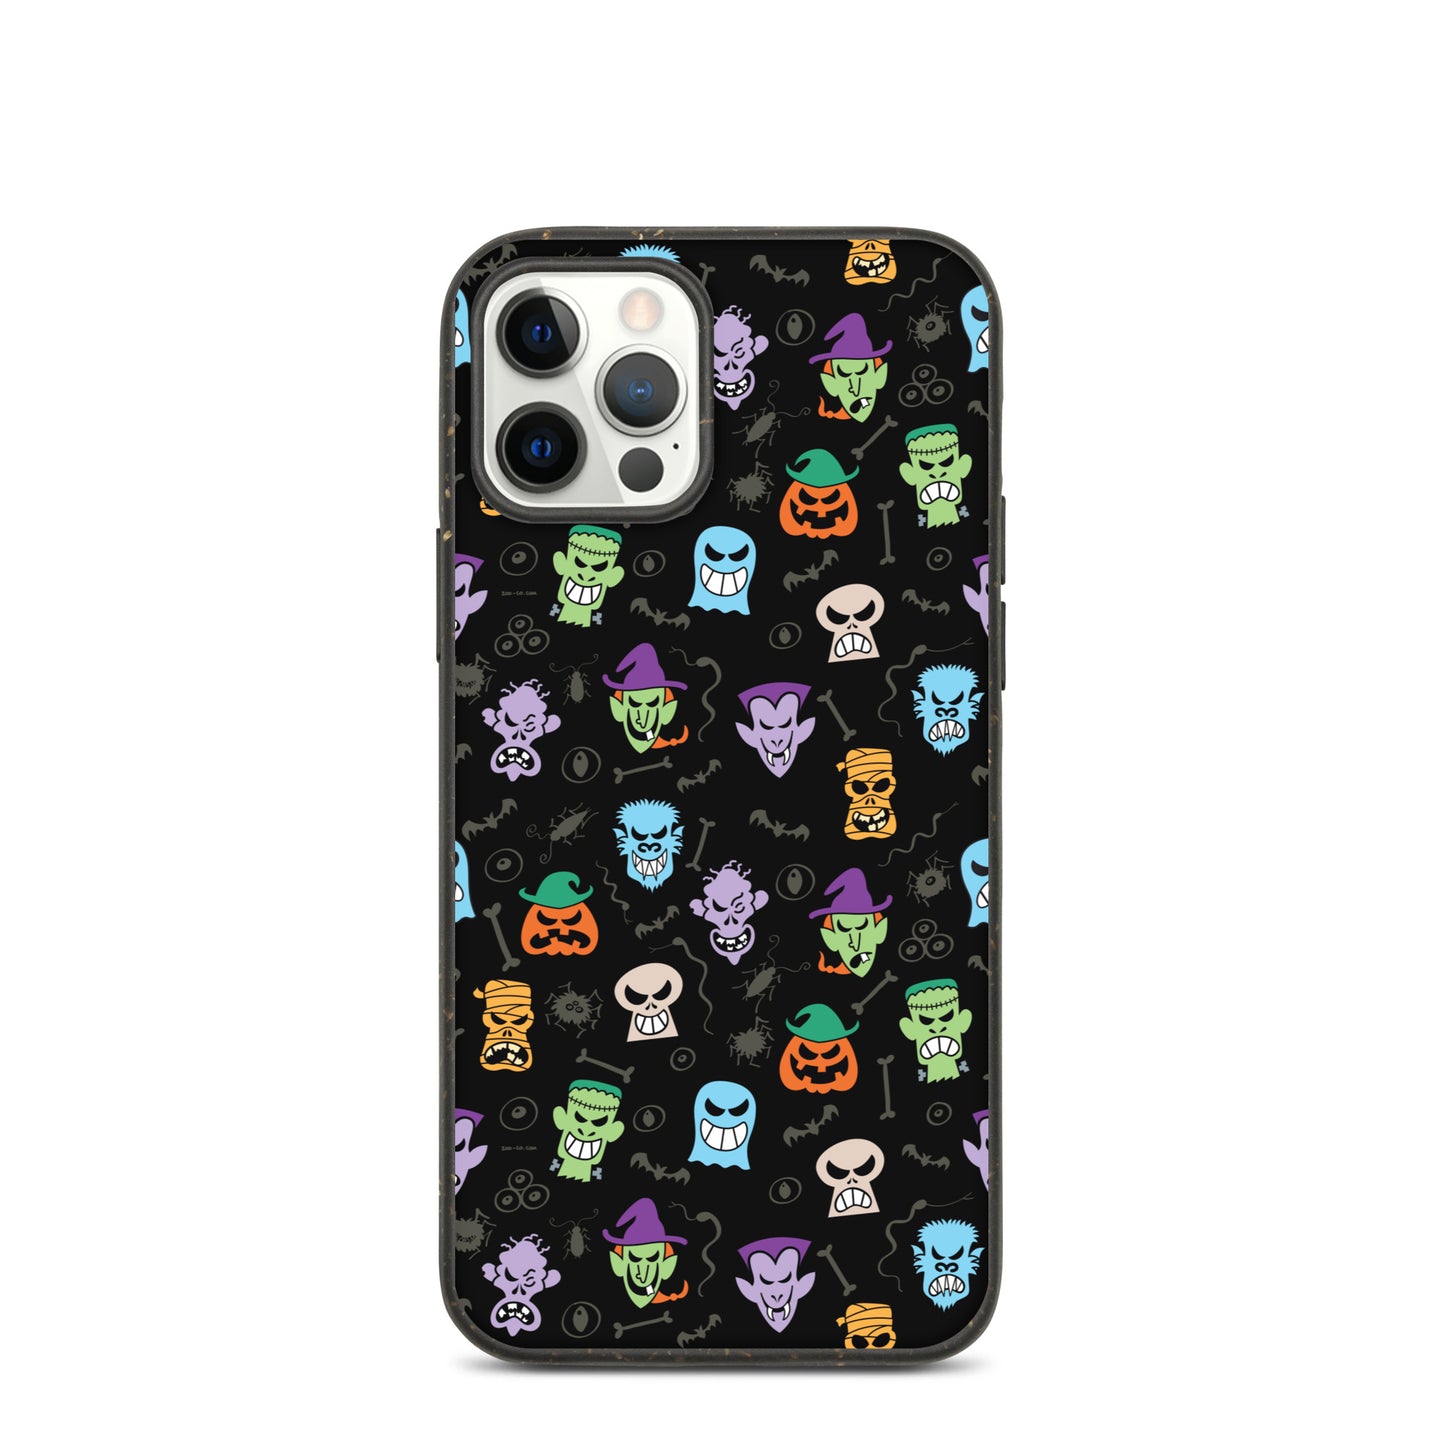 Scary Halloween faces Speckled iPhone case. iPhone 12 pro